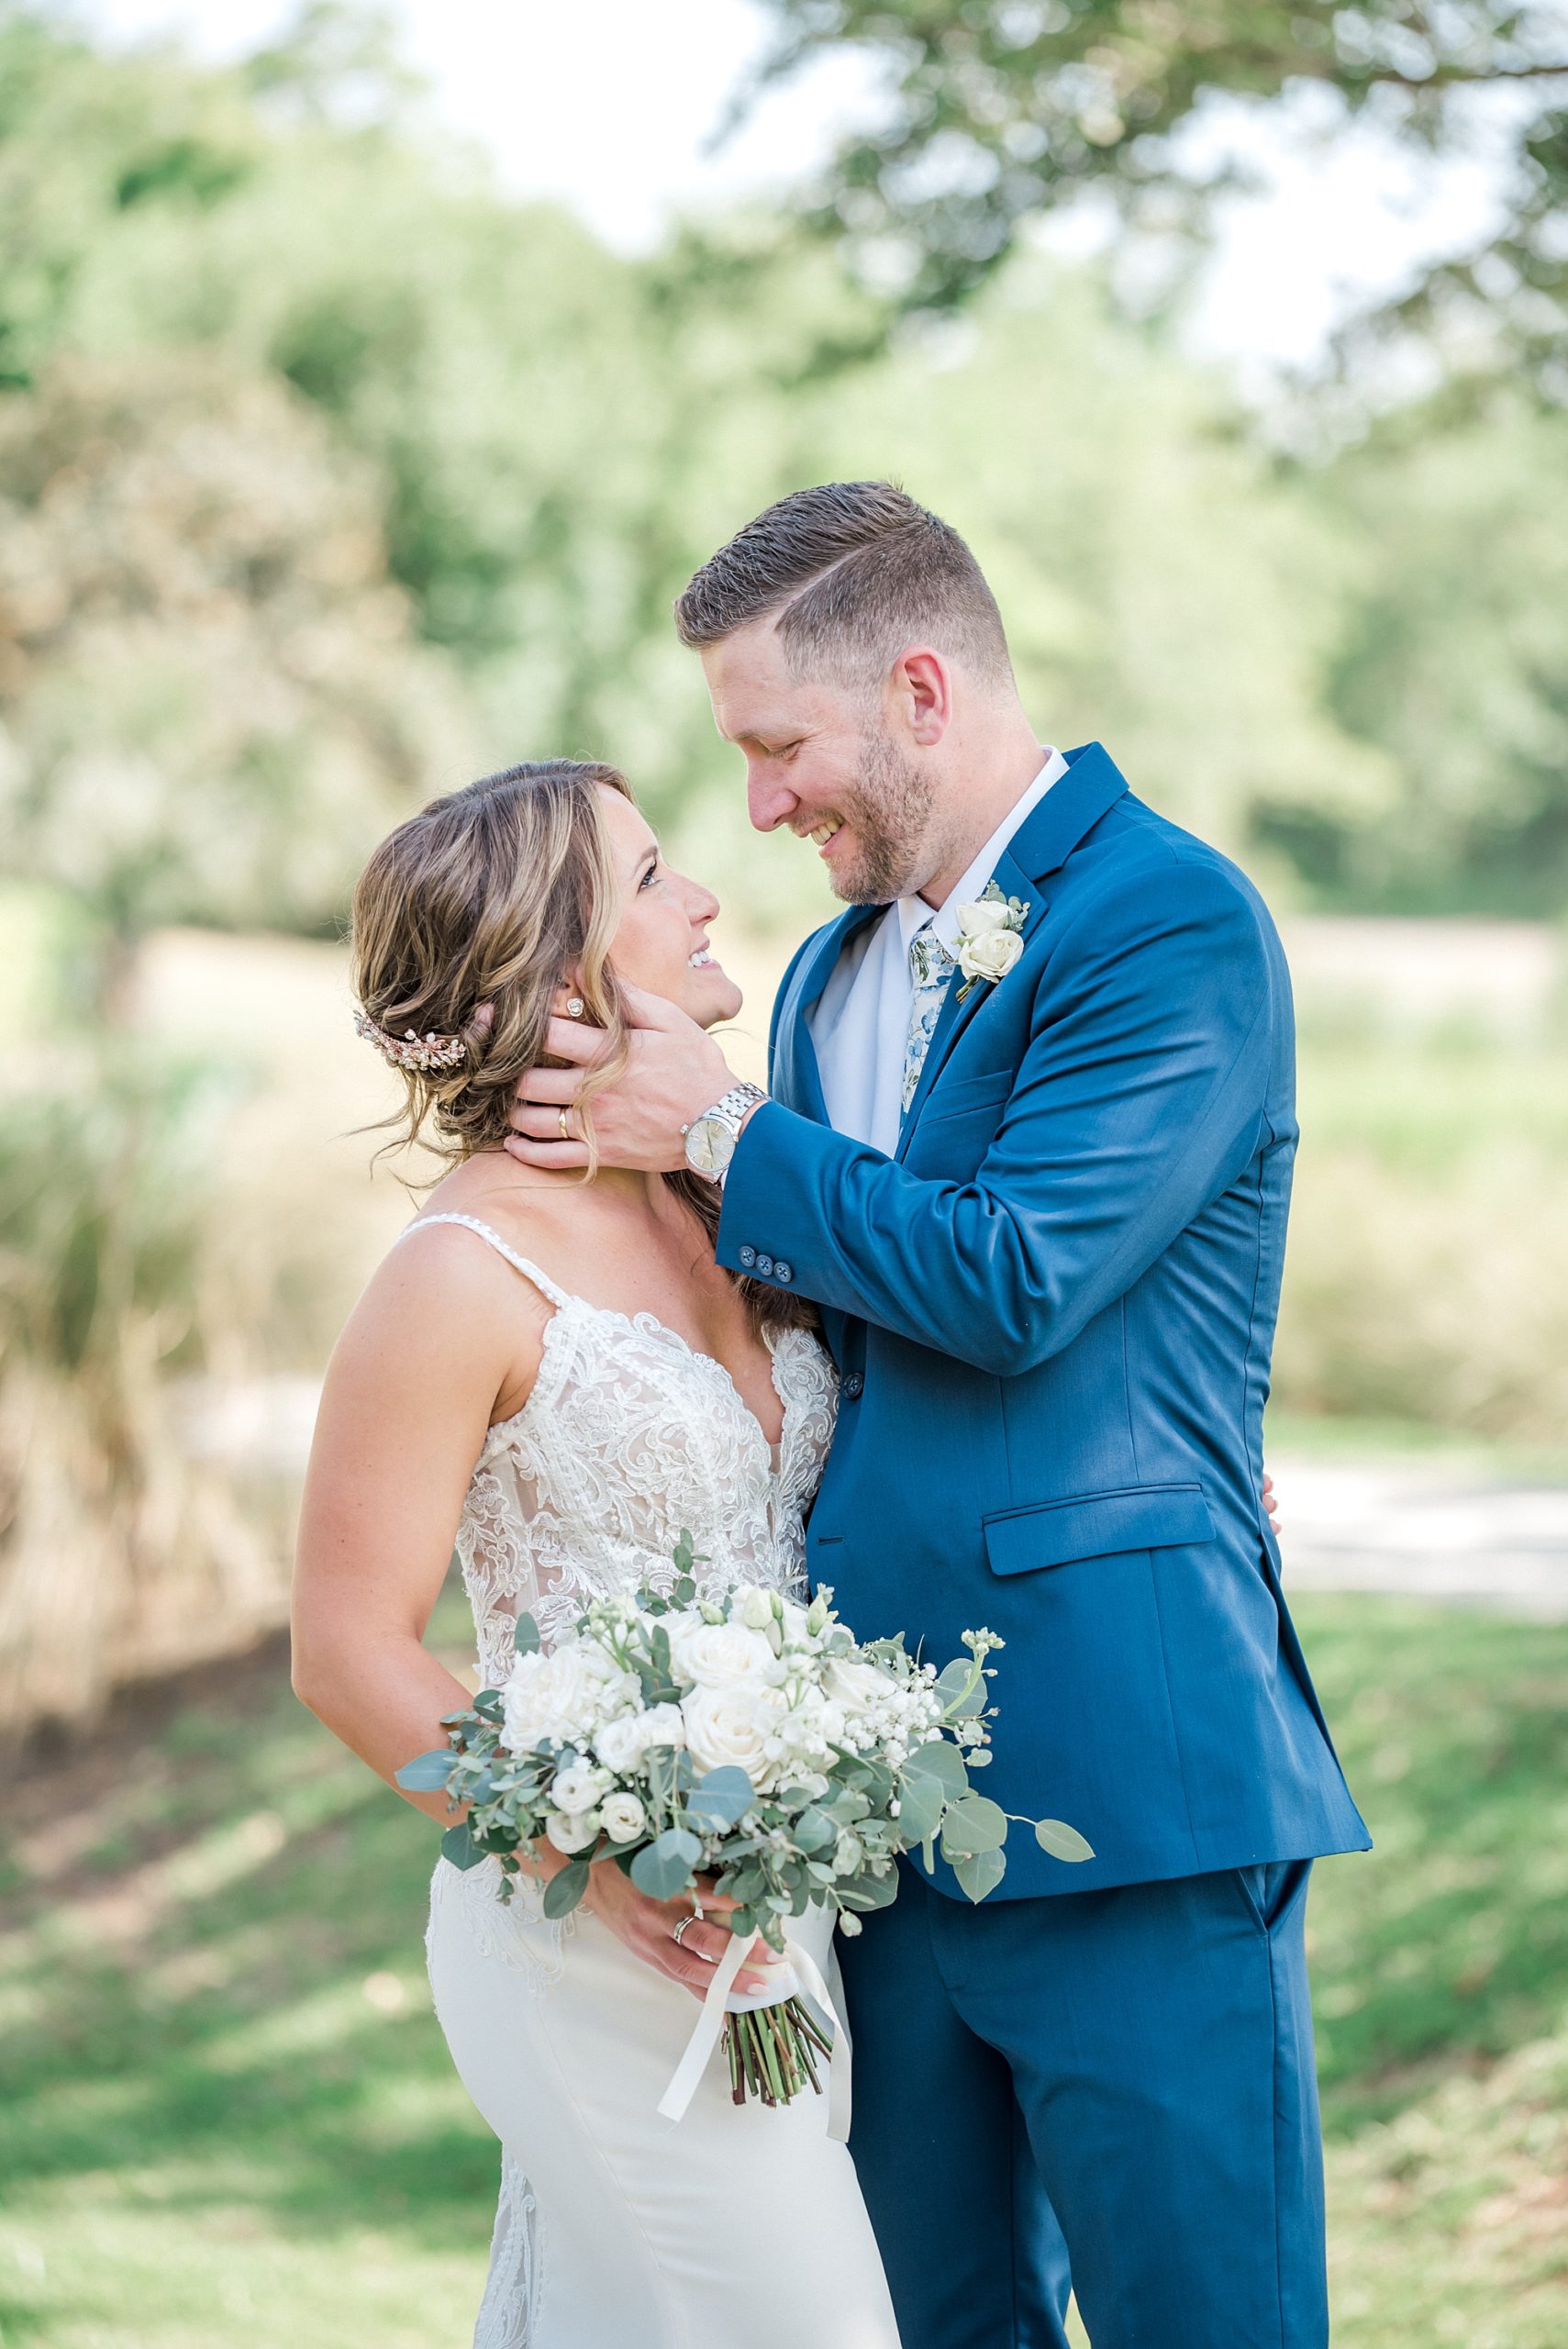 newlyweds share moment together after wedding ceremony